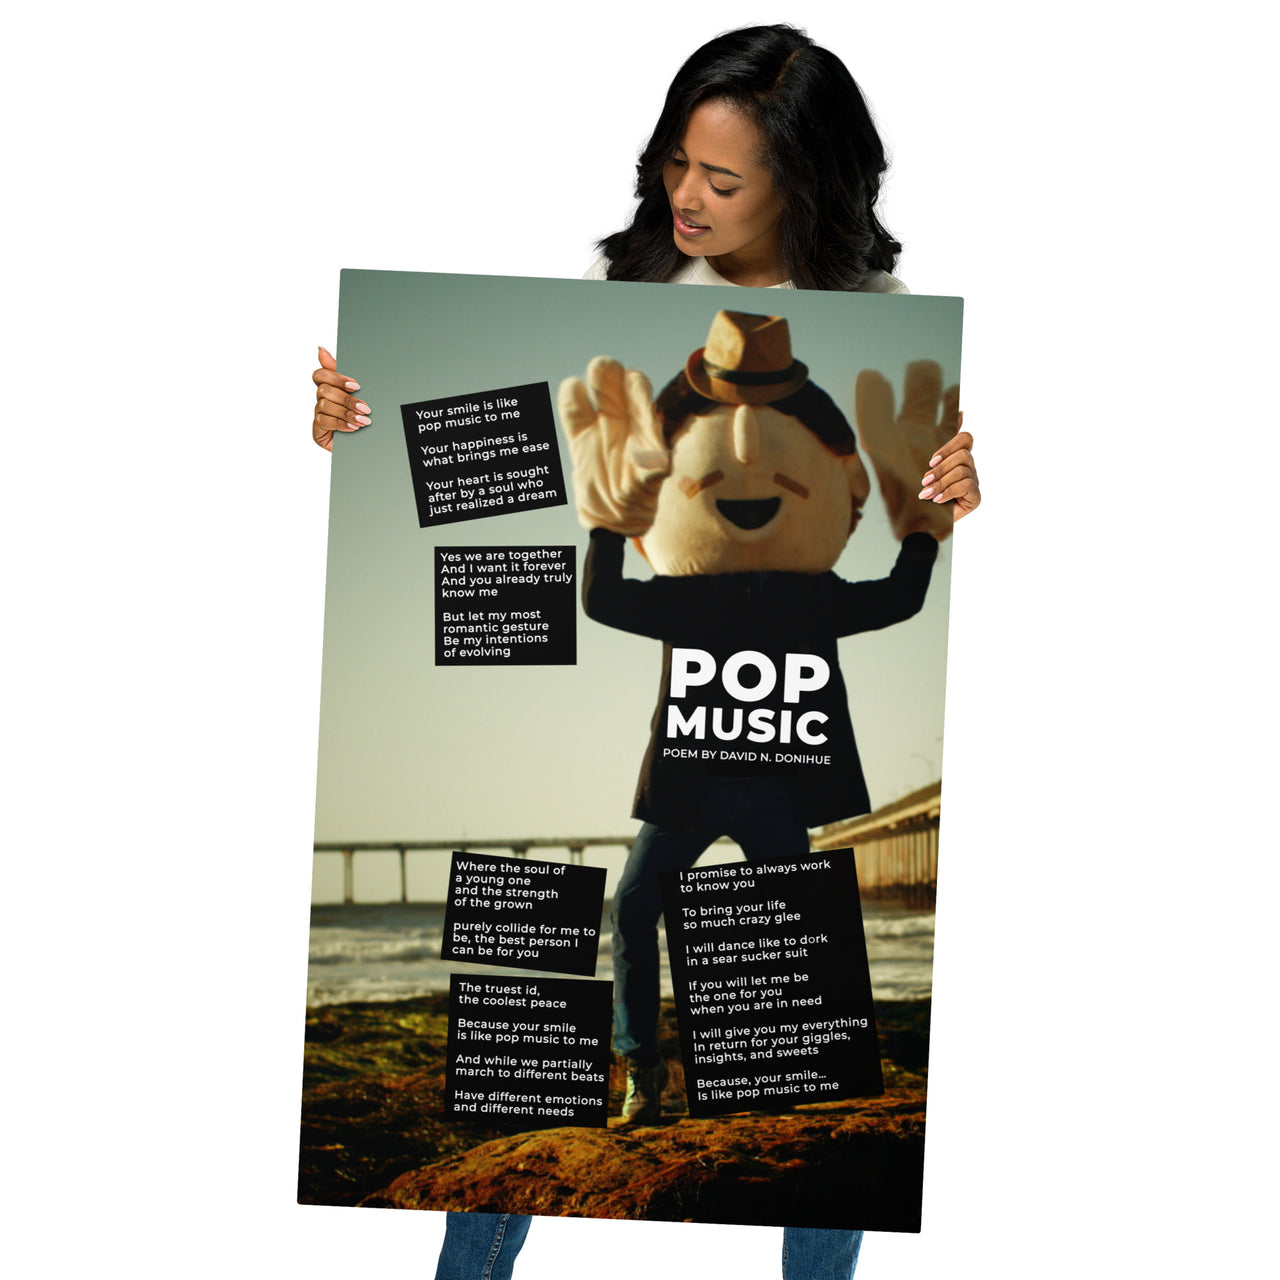 METAL PRINT - "POP MUSIC" ULTRA LARGE HIGH GLOSS DELUX LIMITED EDITION (1/1000)